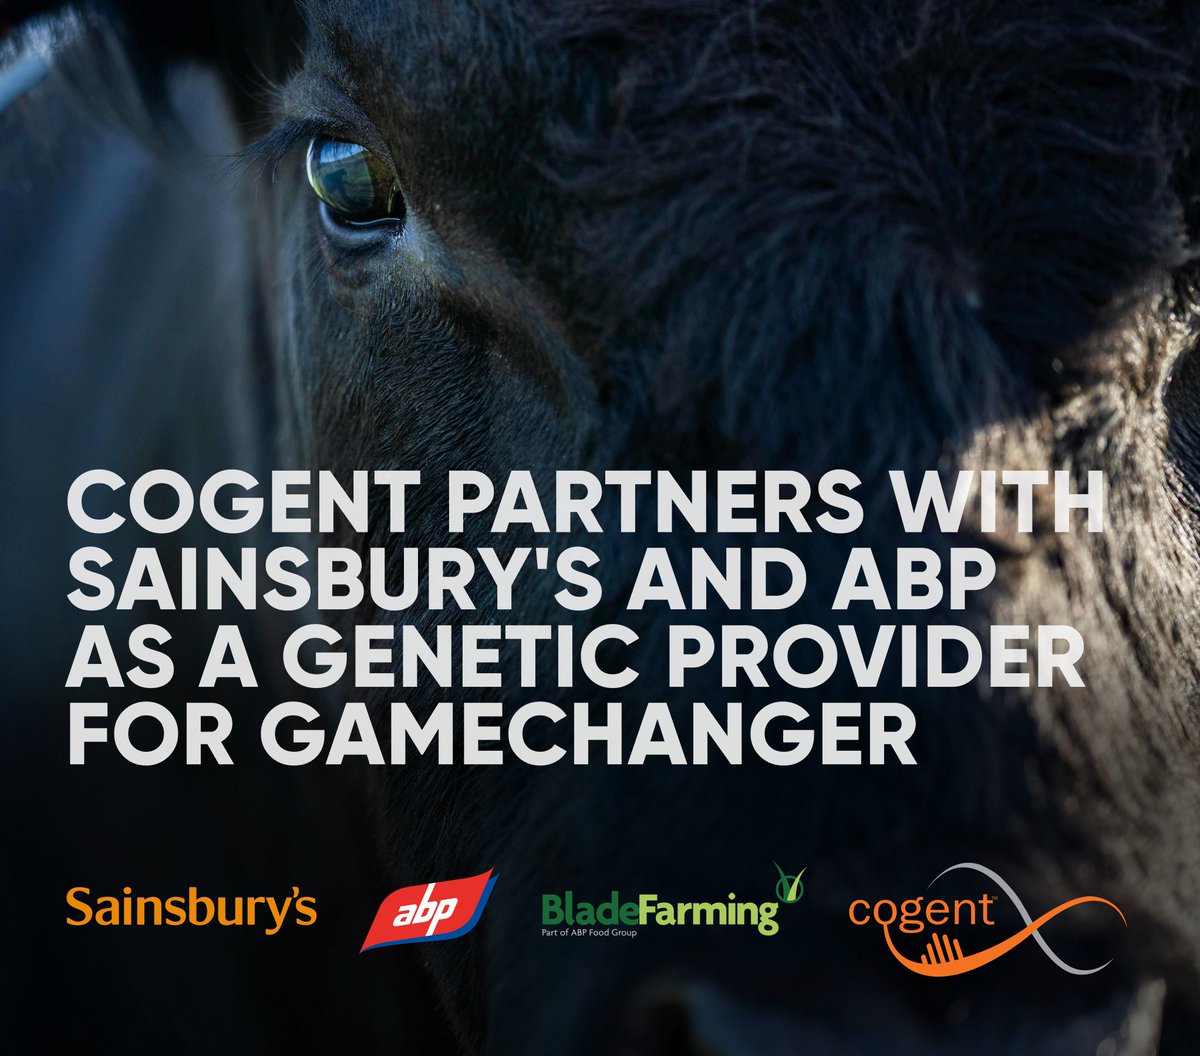 BREAKING NEWS❗️ From today, Cogent genetics are available to all Gamechanger producers! Read the official press release on cogentuk.com/news/cogent-br… and contact your local Genetics Consultant for more information. #thecogentdifference